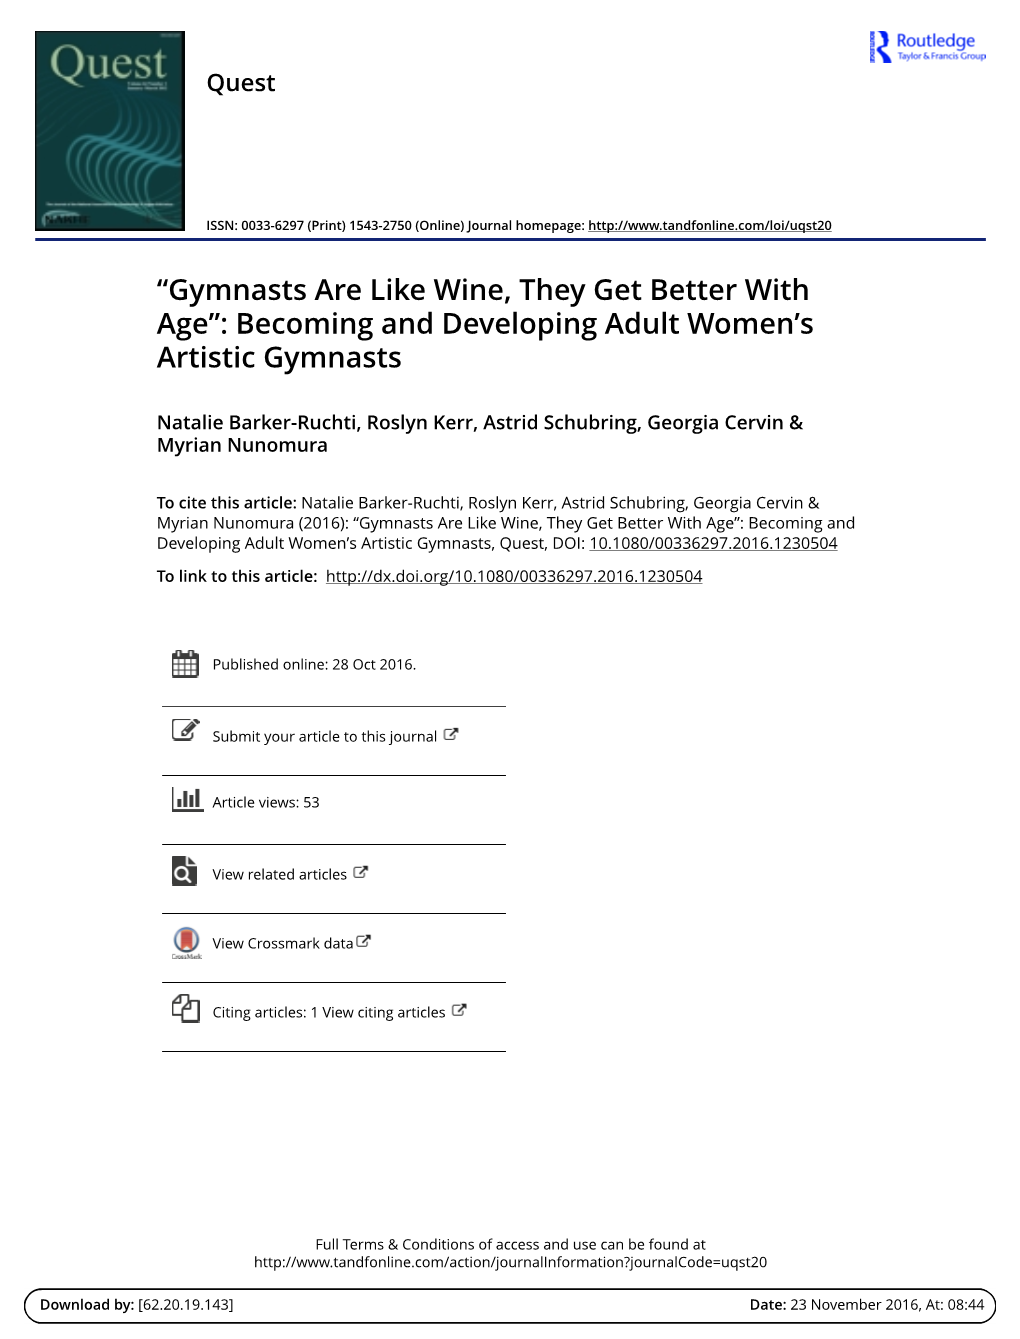 “Gymnasts Are Like Wine, They Get Better with Age”: Becoming and Developing Adult Women's Artistic Gymnasts